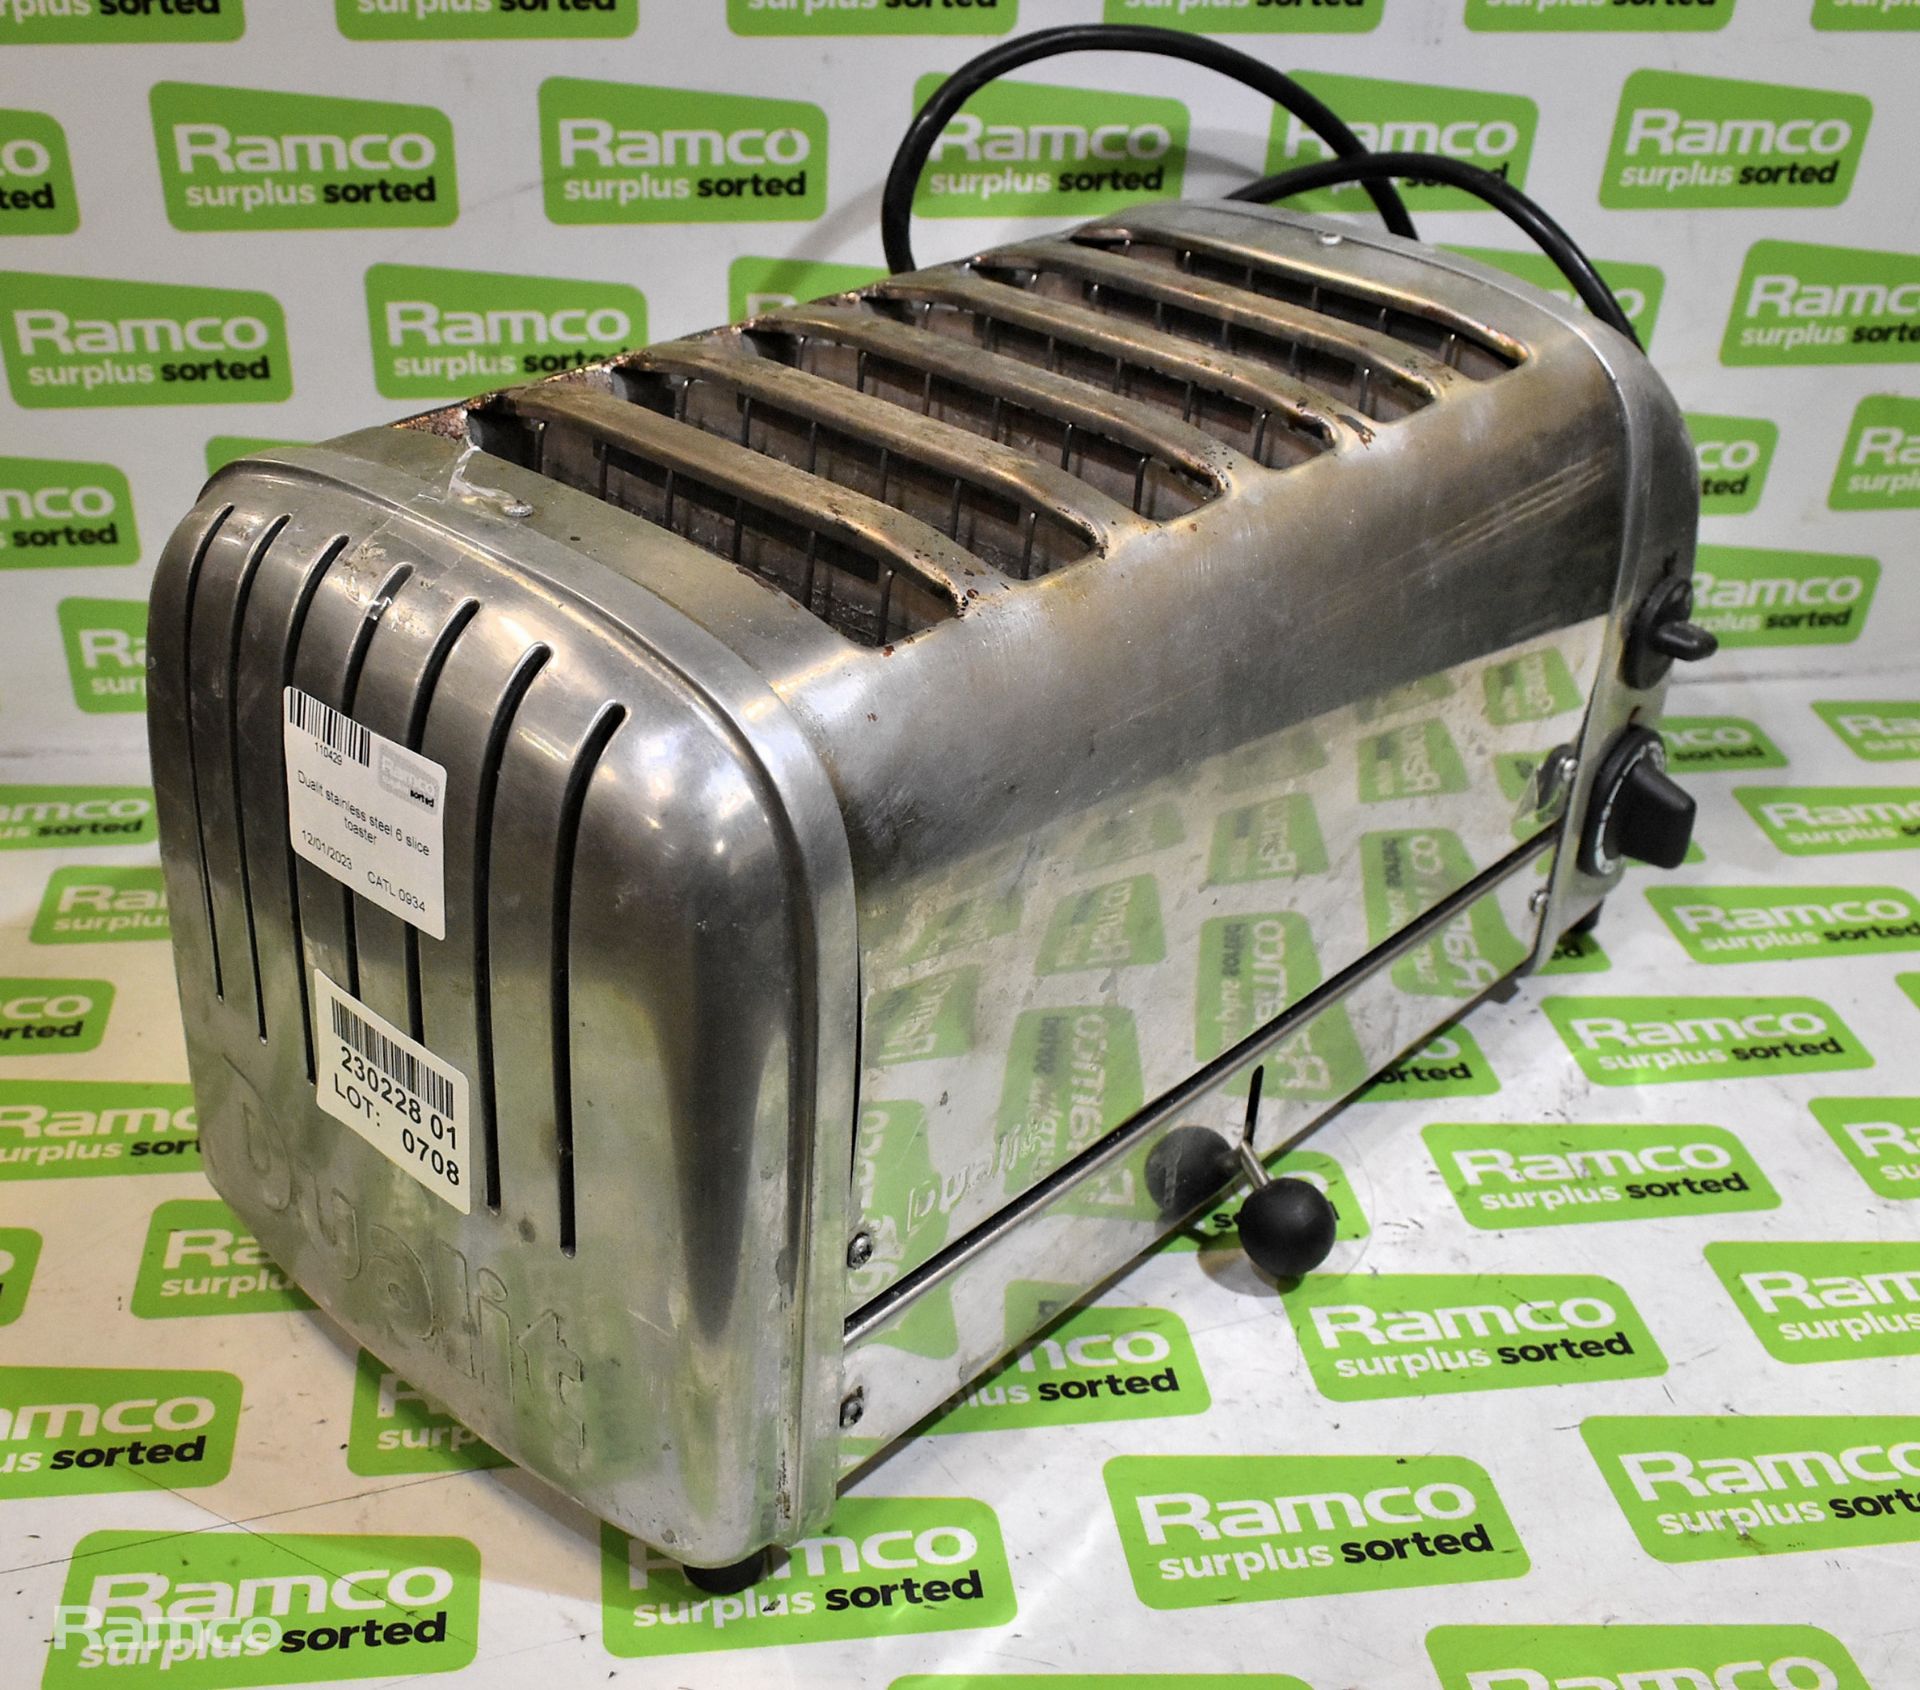 Dualit stainless steel 6 slice toaster - Image 2 of 3